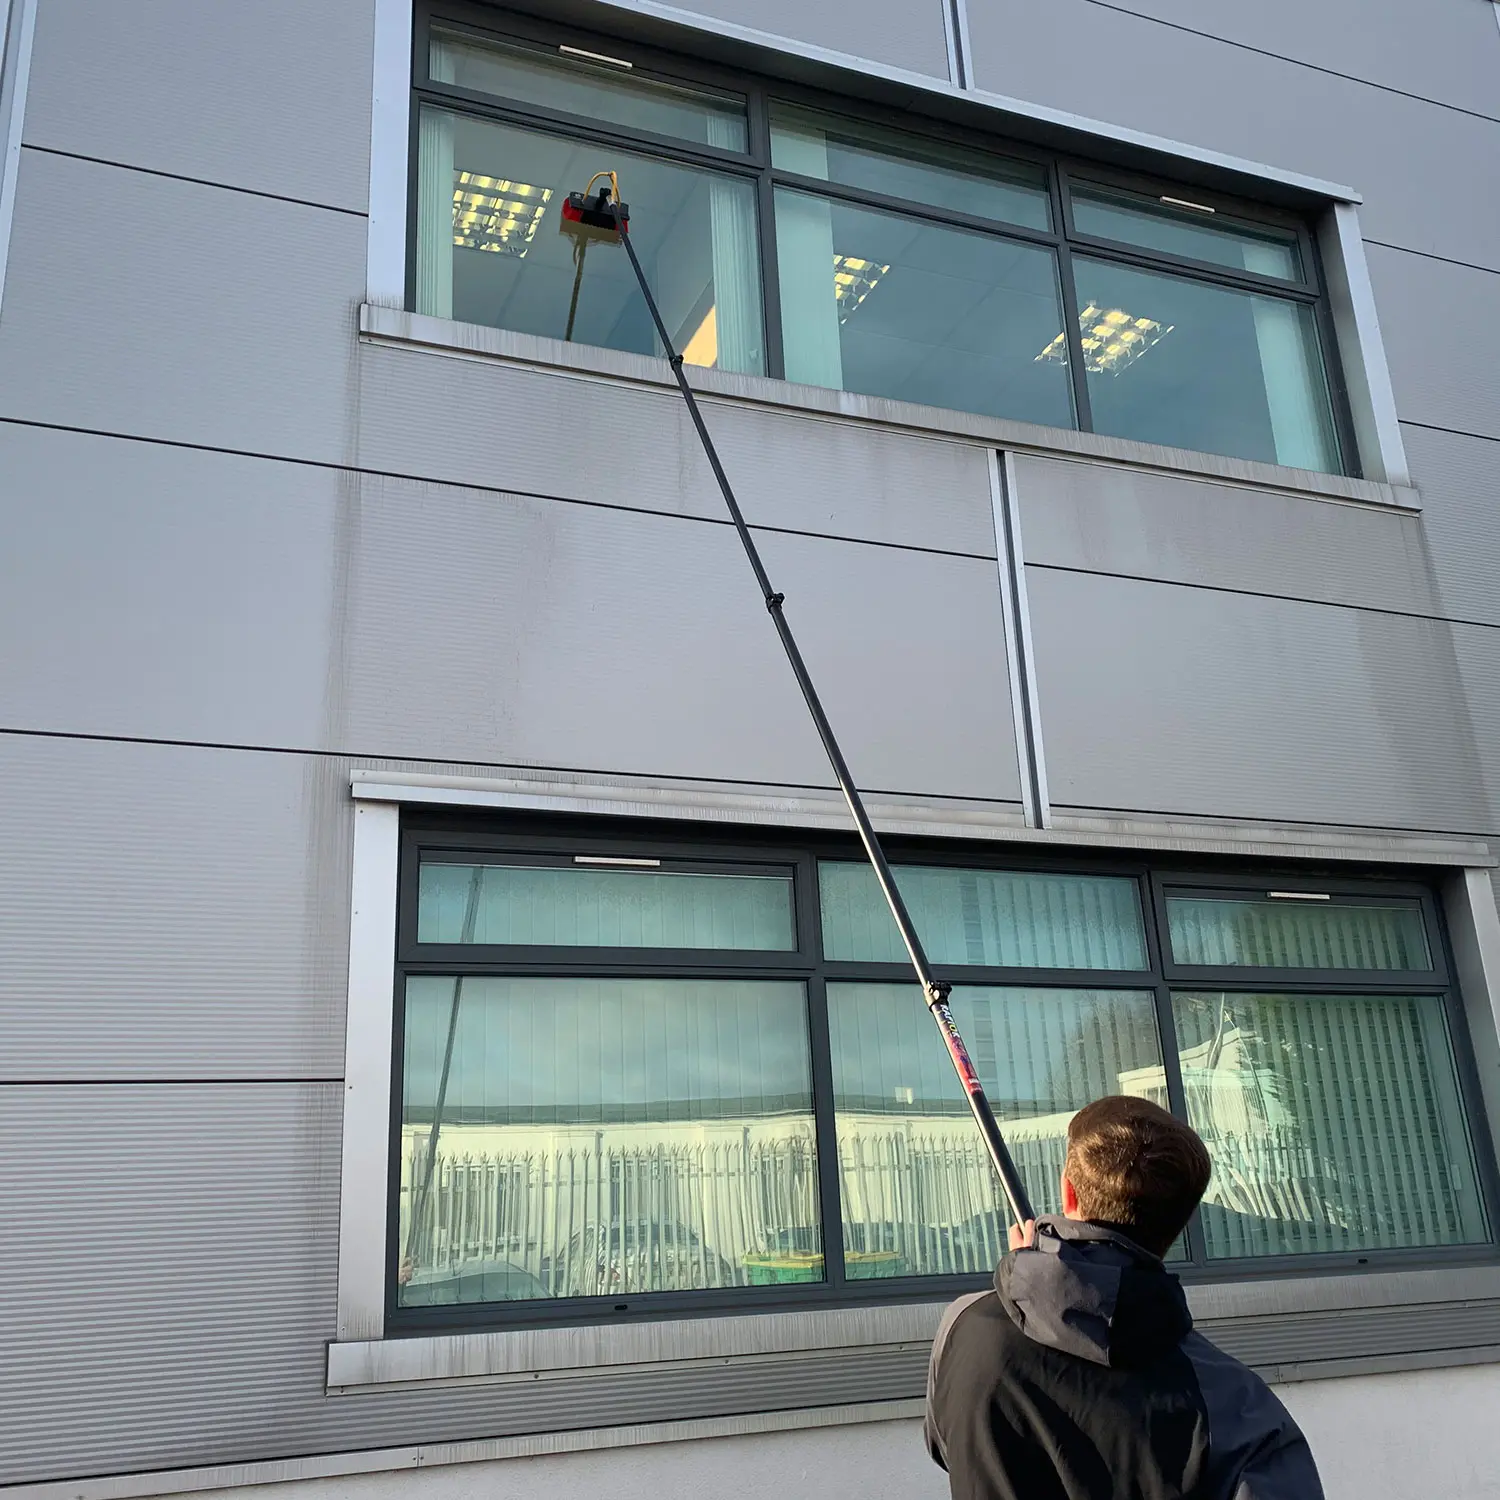 Ultimate Guide to Professional Window Cleaning Tools